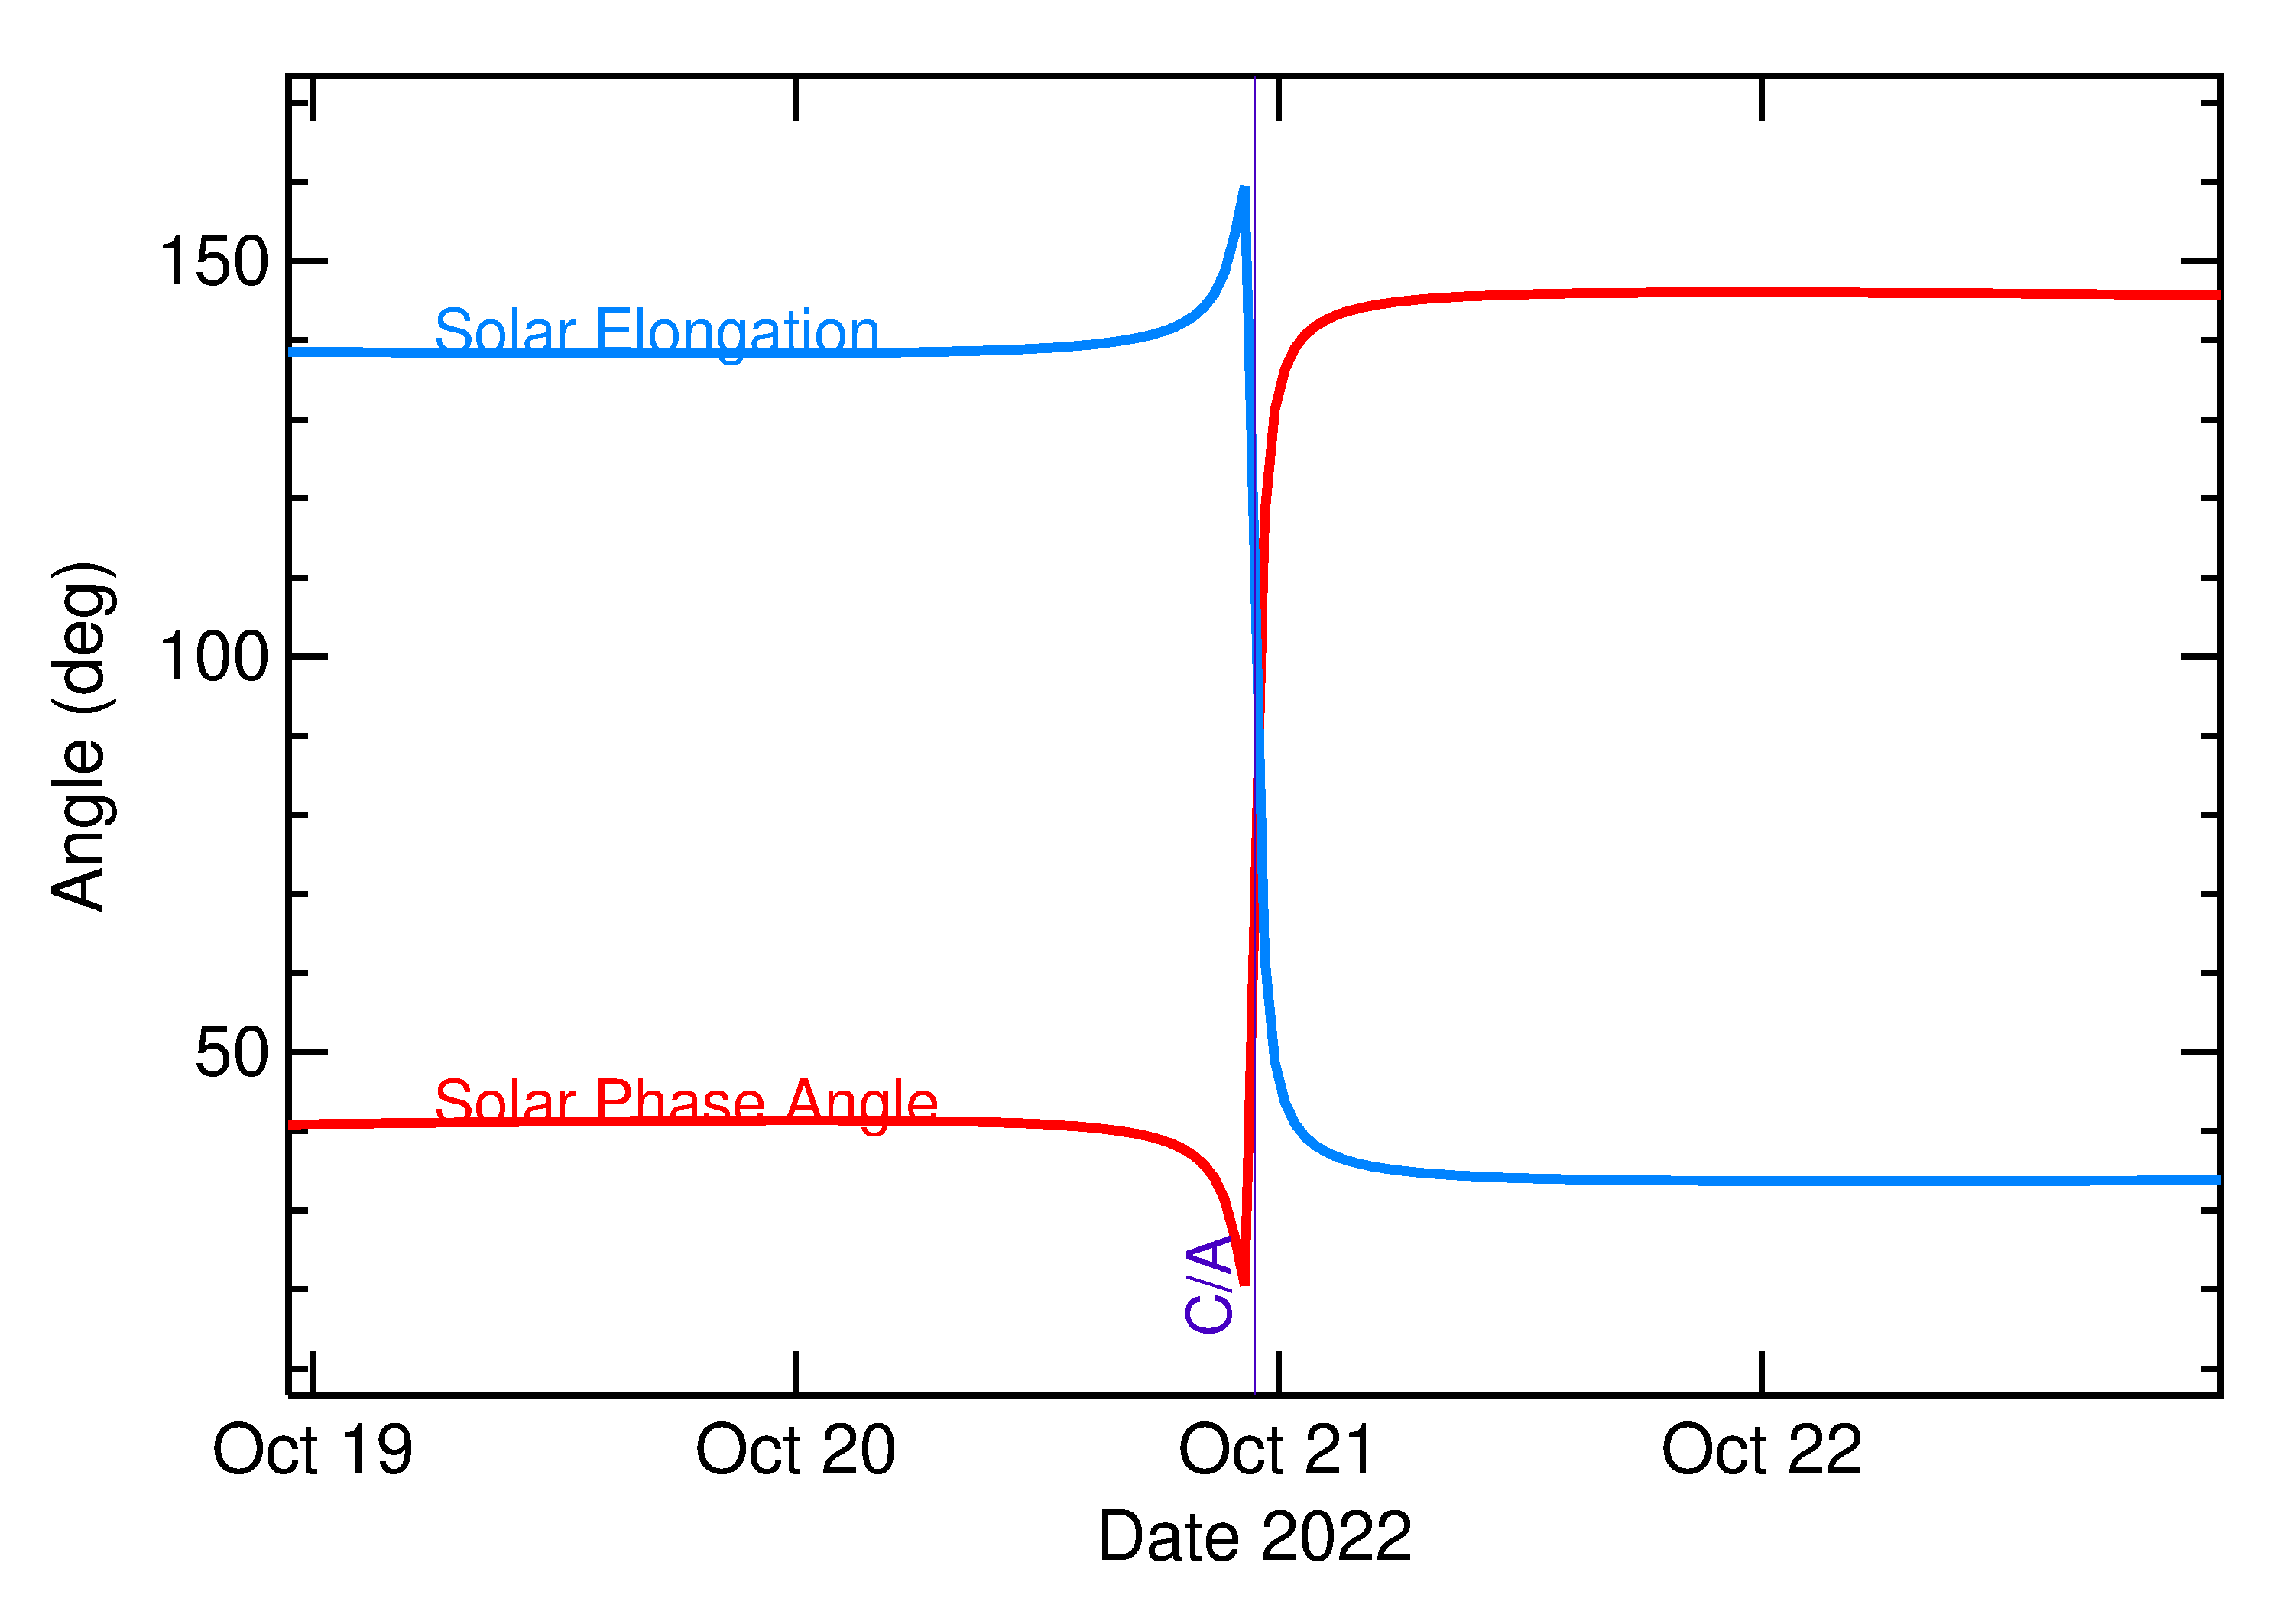 Solar Elongation and Solar Phase Angle of 2022 UR4 in the days around closest approach